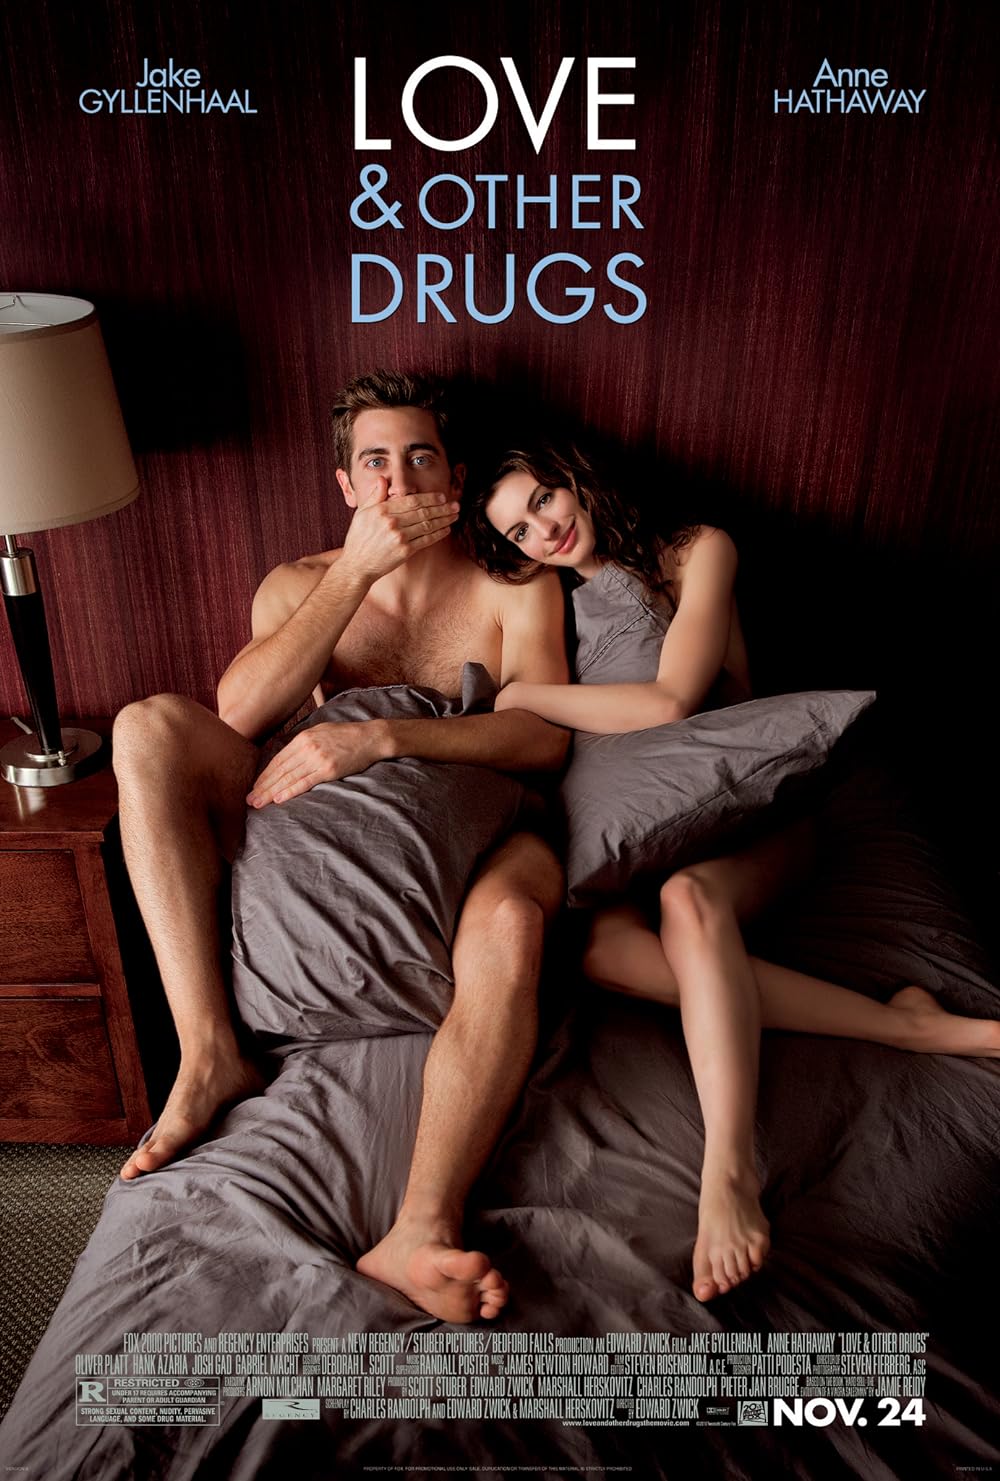 FULL MOVIE: Love and Other Drugs (2010)